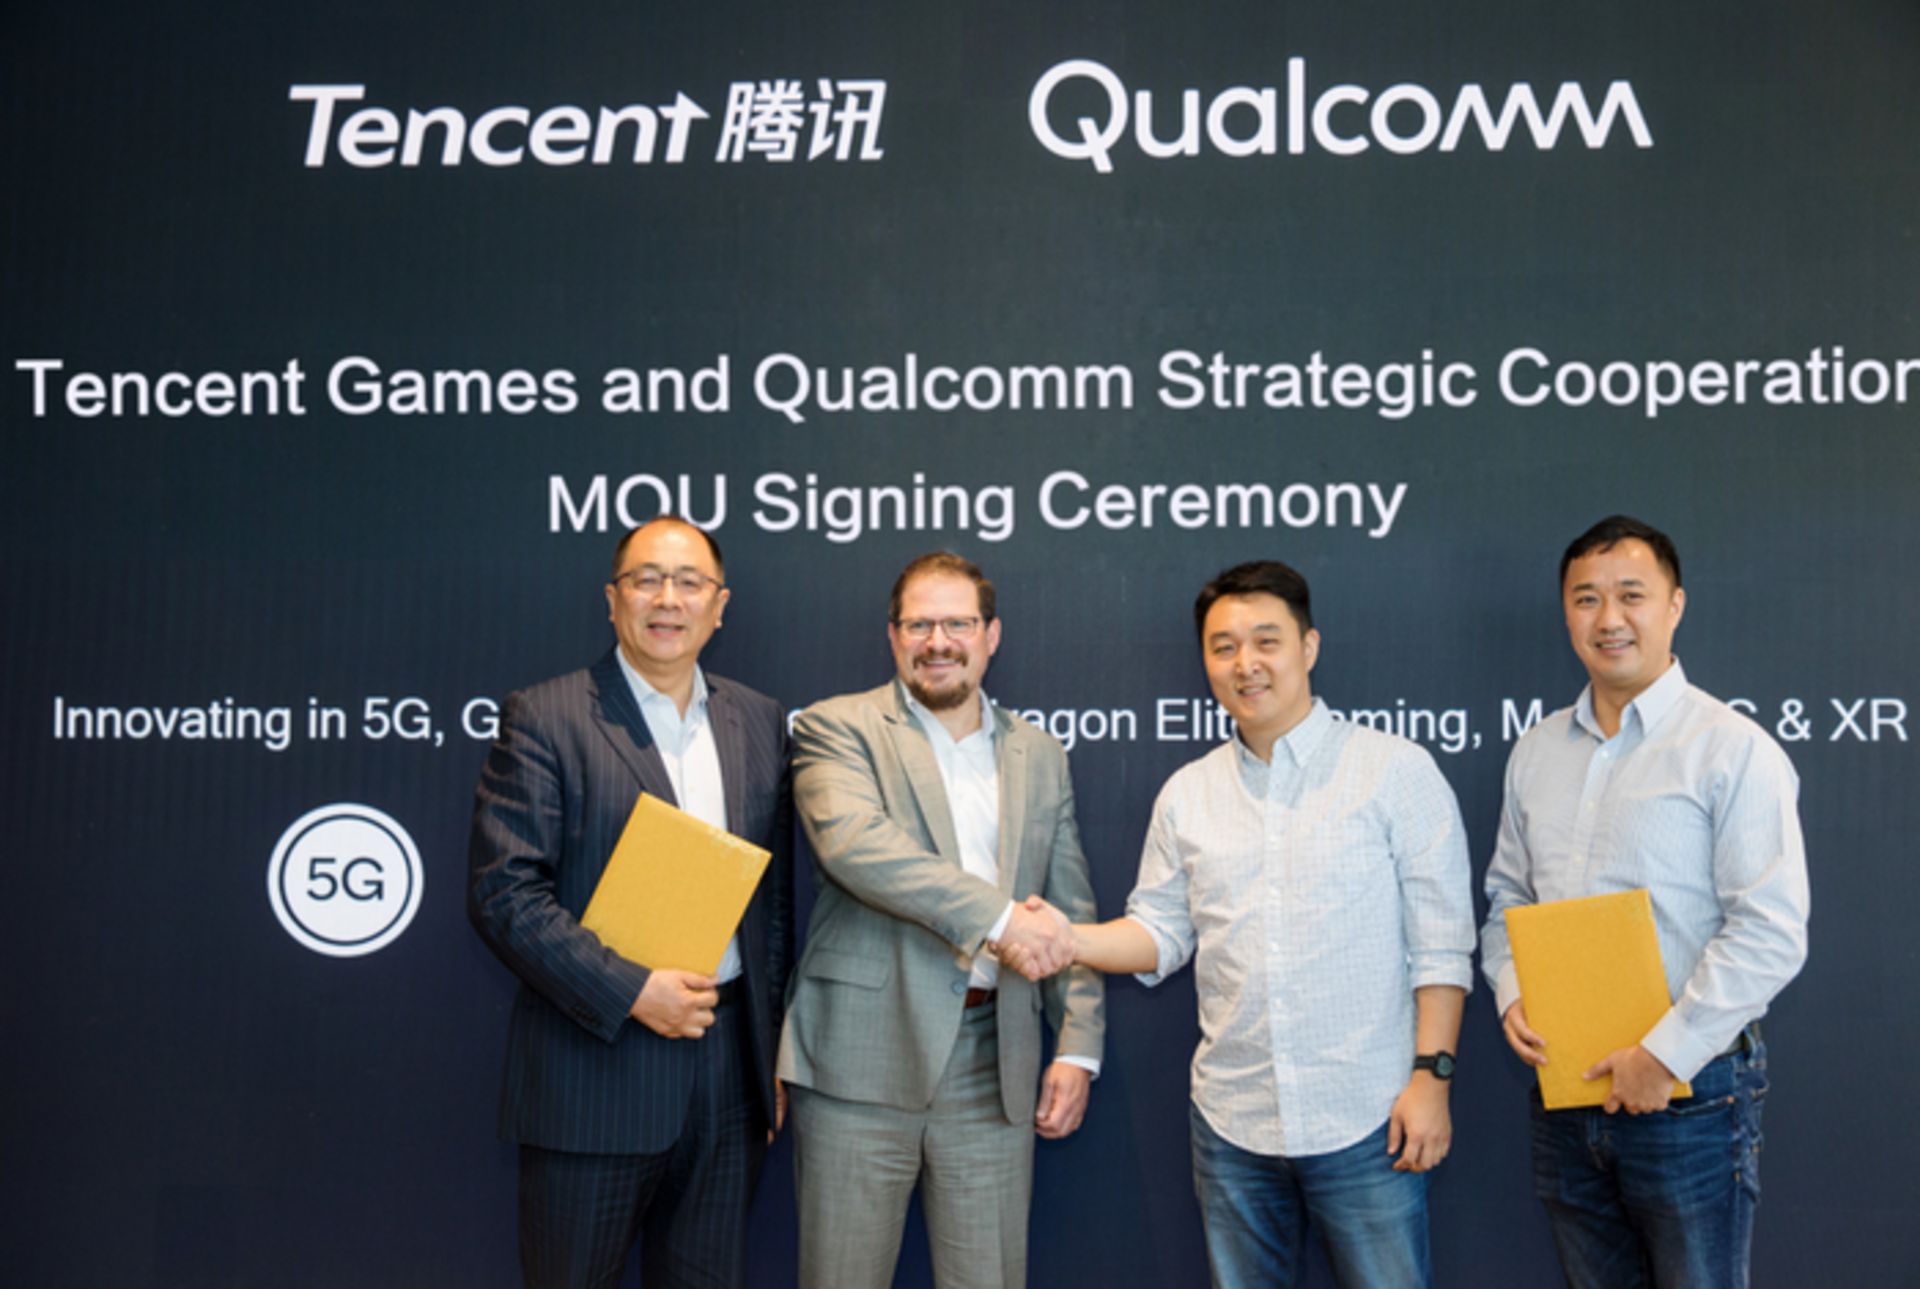 Qualcomm and Tencent